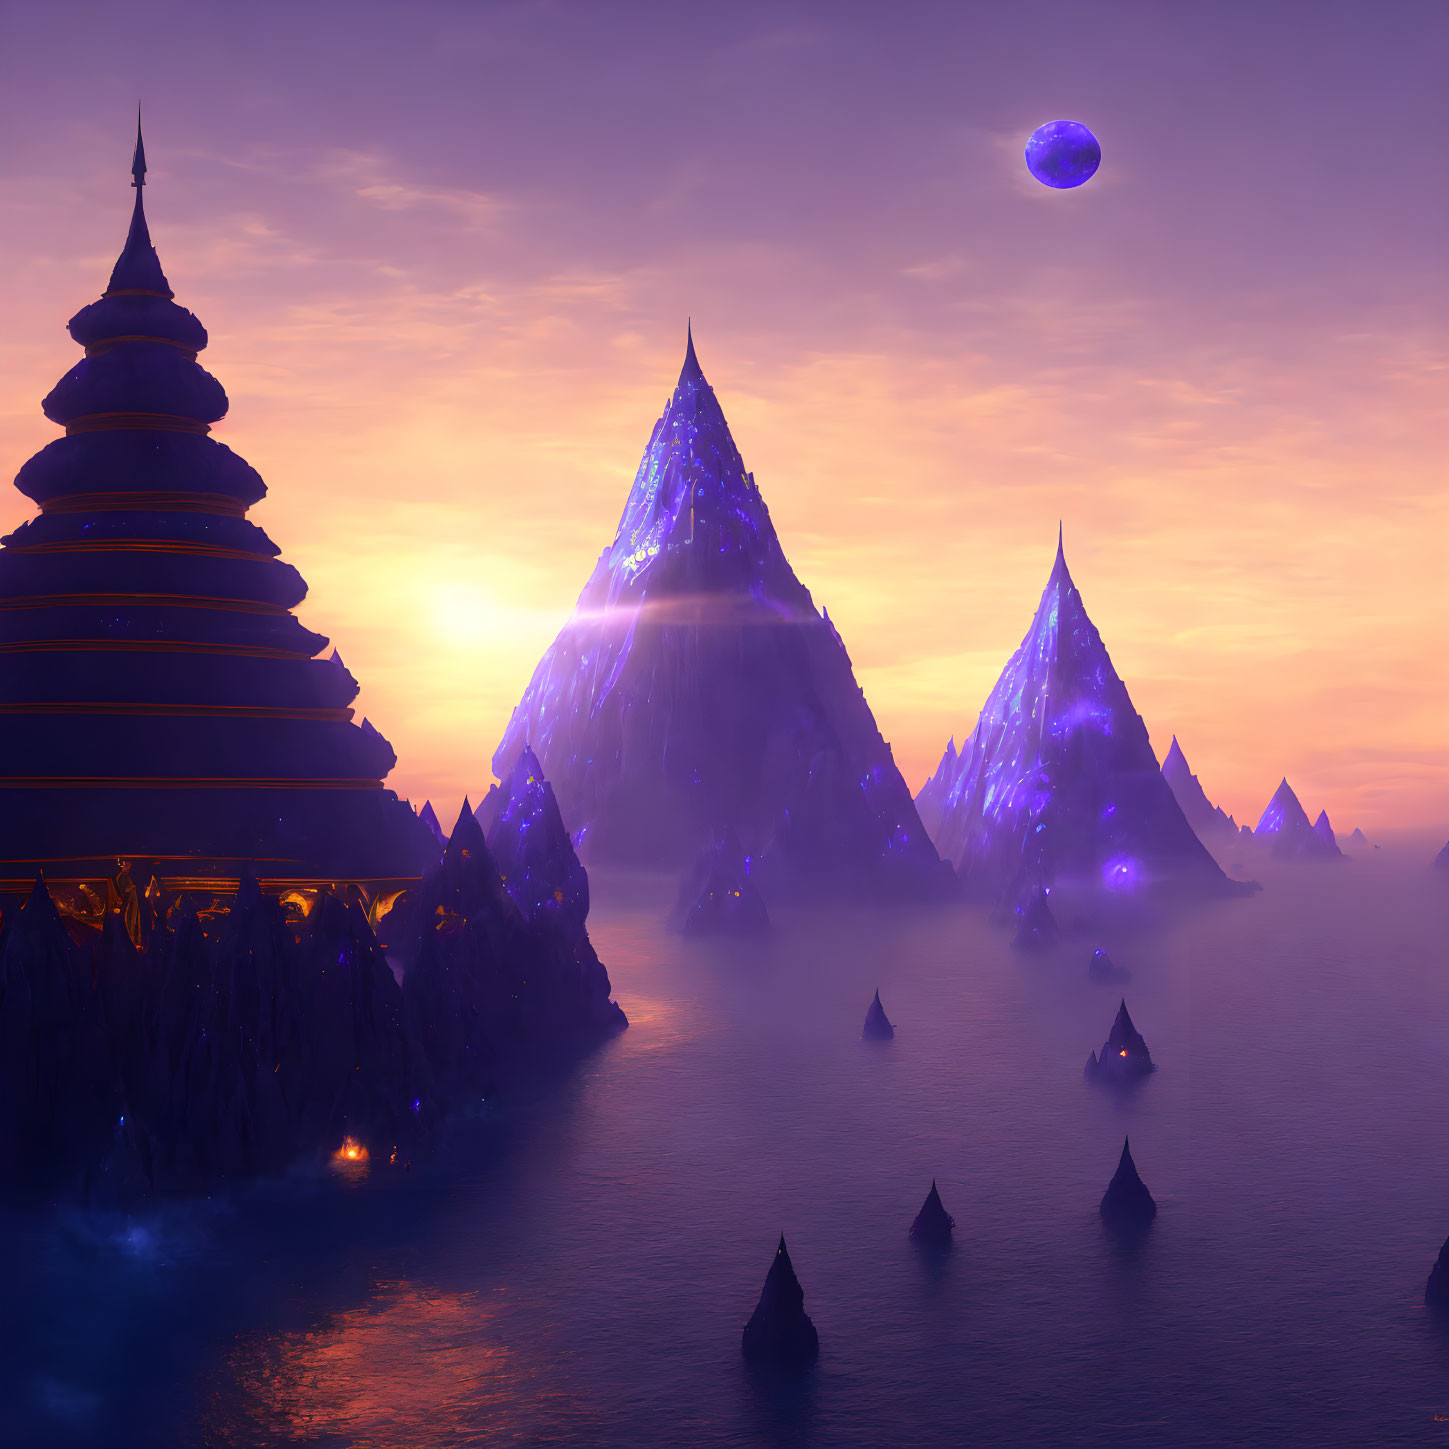 Pyramid Structures on an Alien World